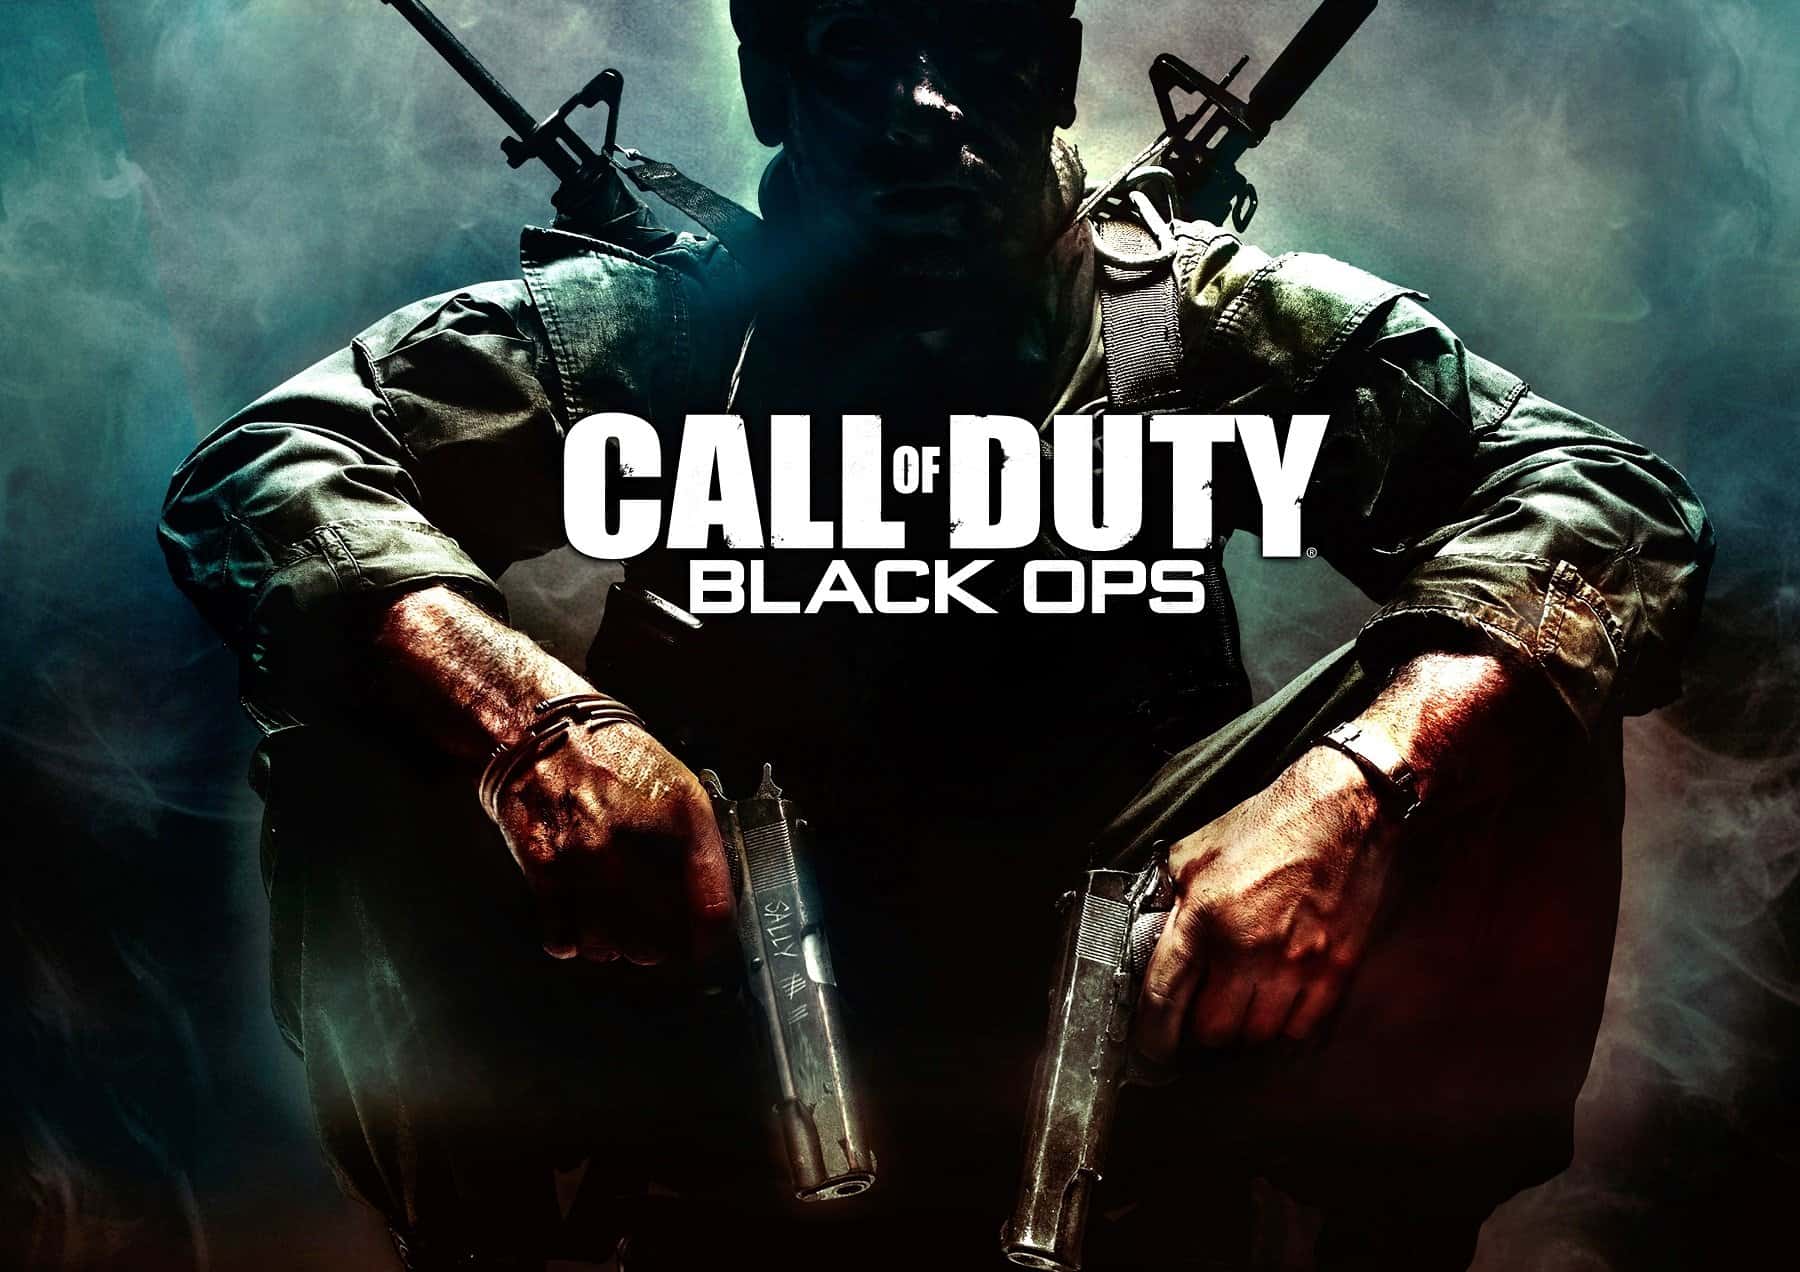 black ops 2 save editor ps3